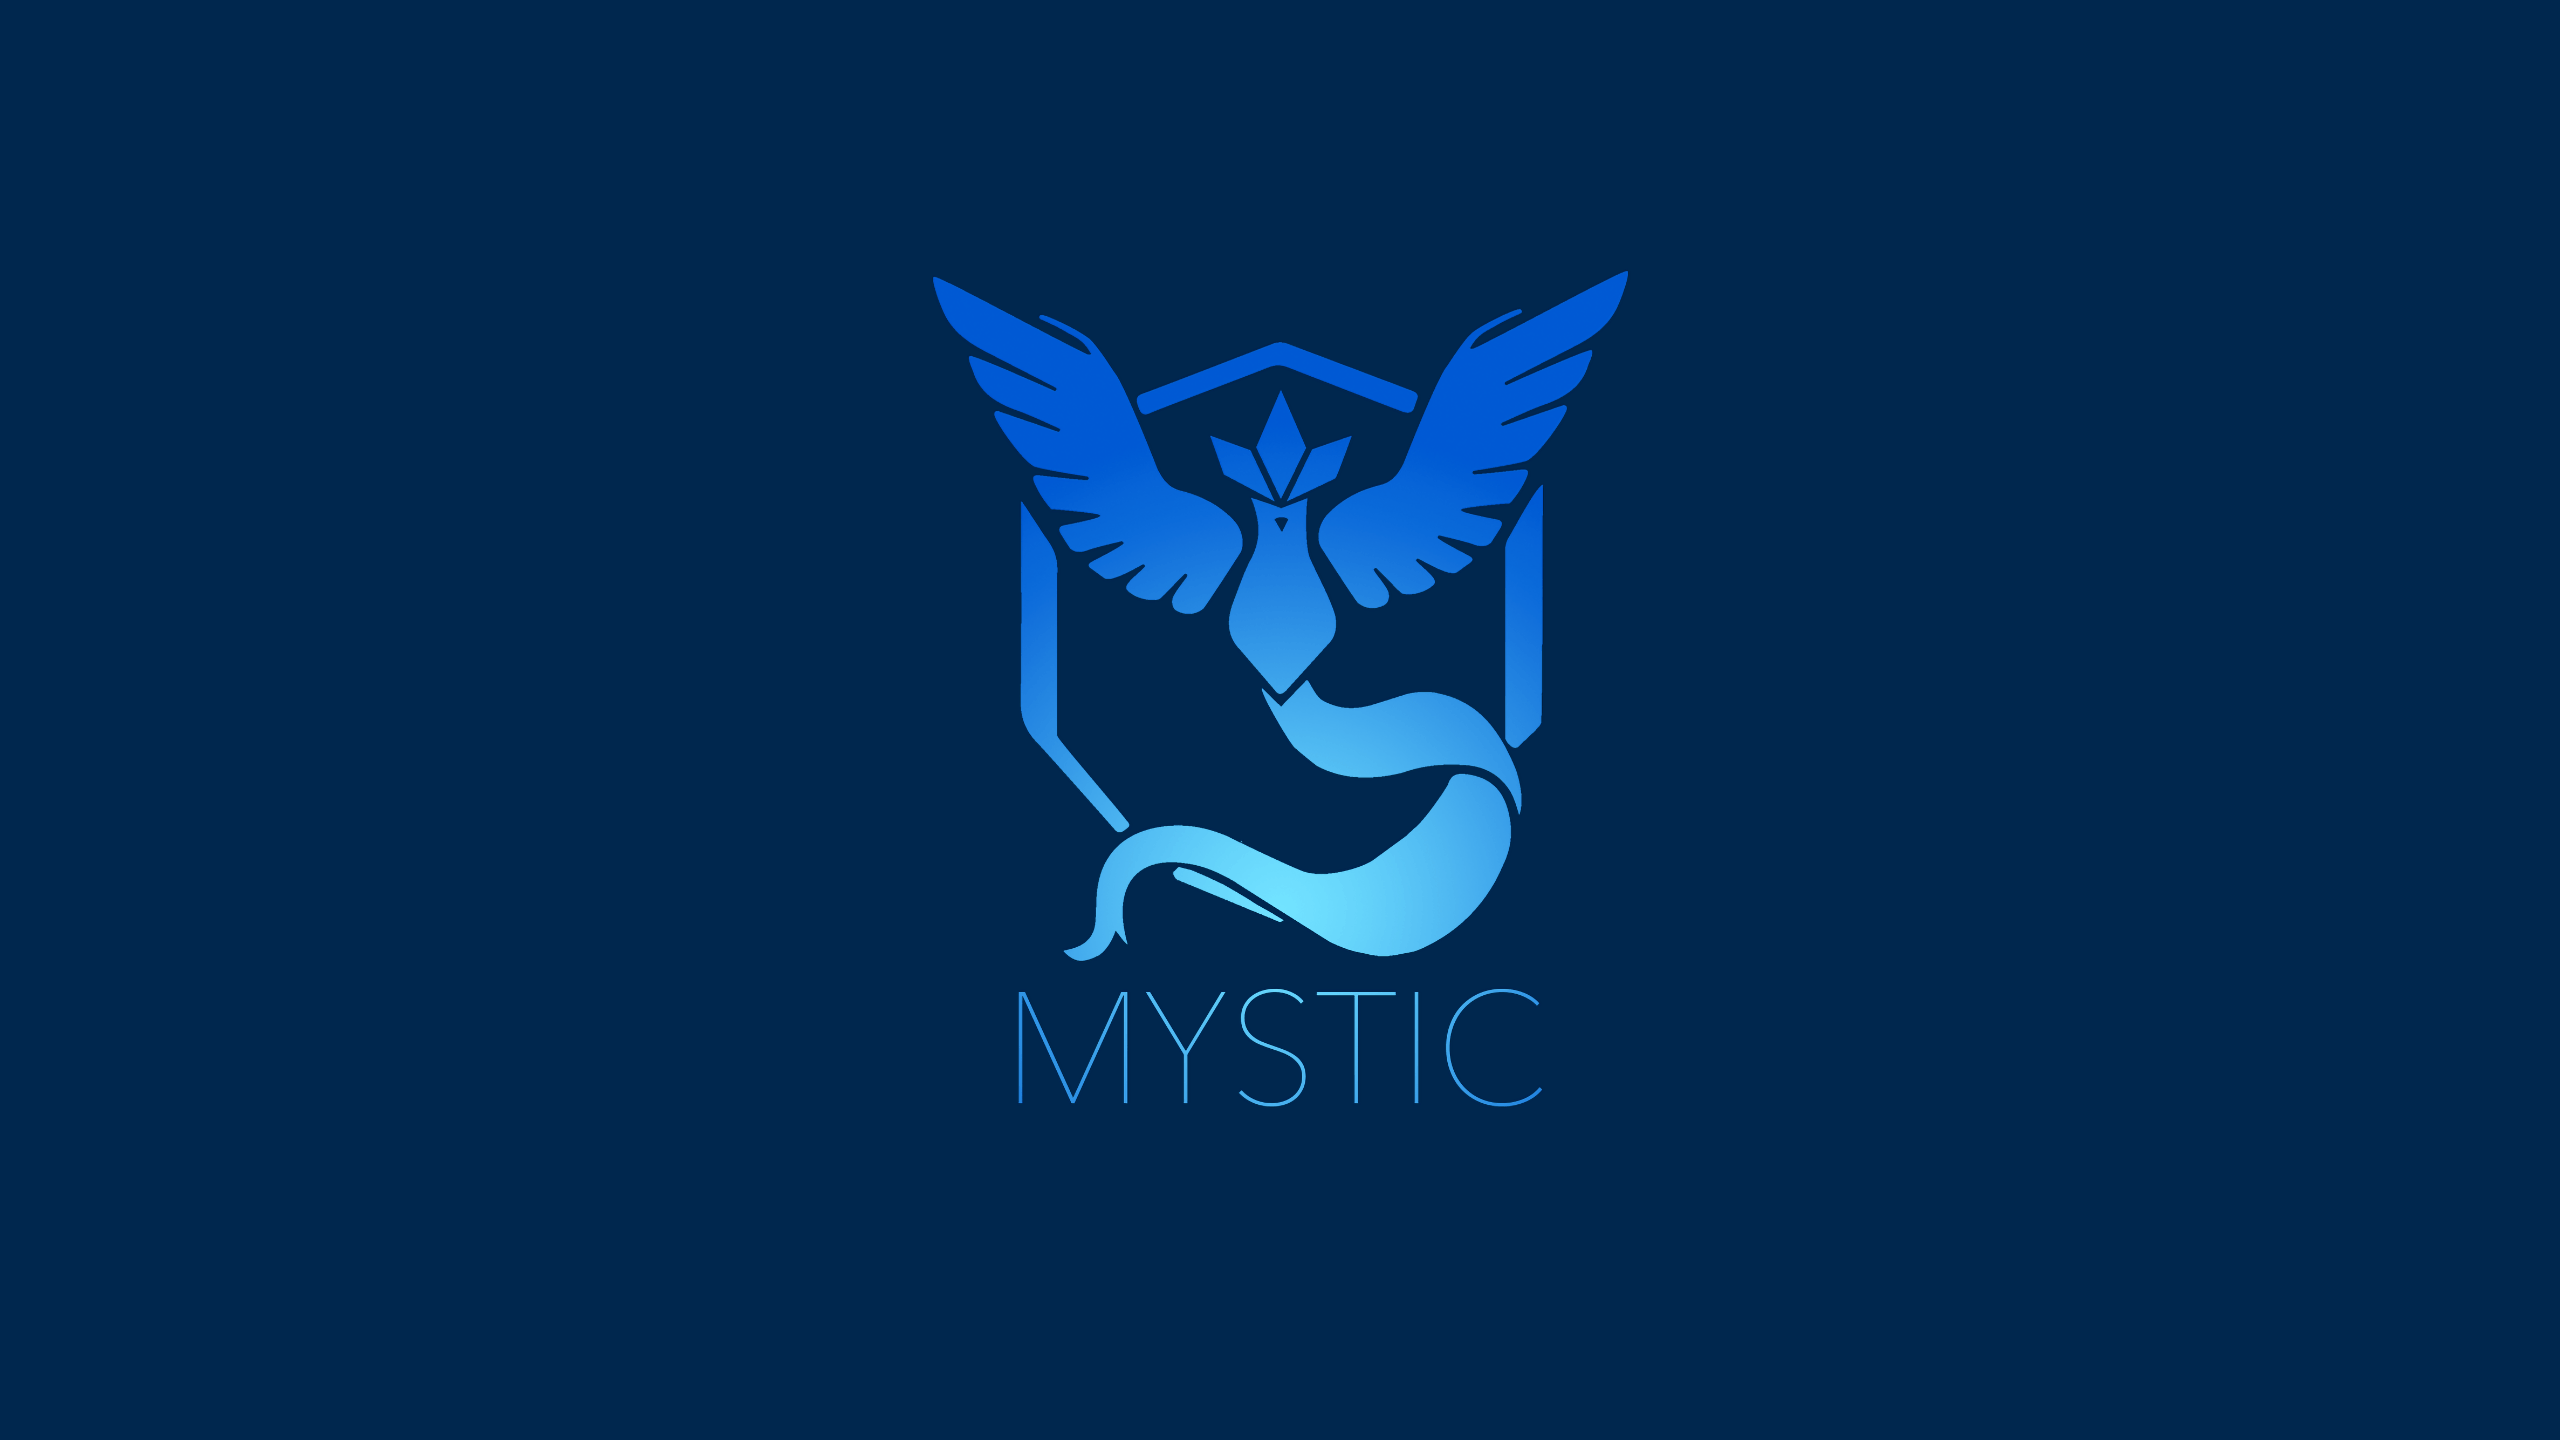 Team Mystic Full HD Wallpaper and Background Imagex1440